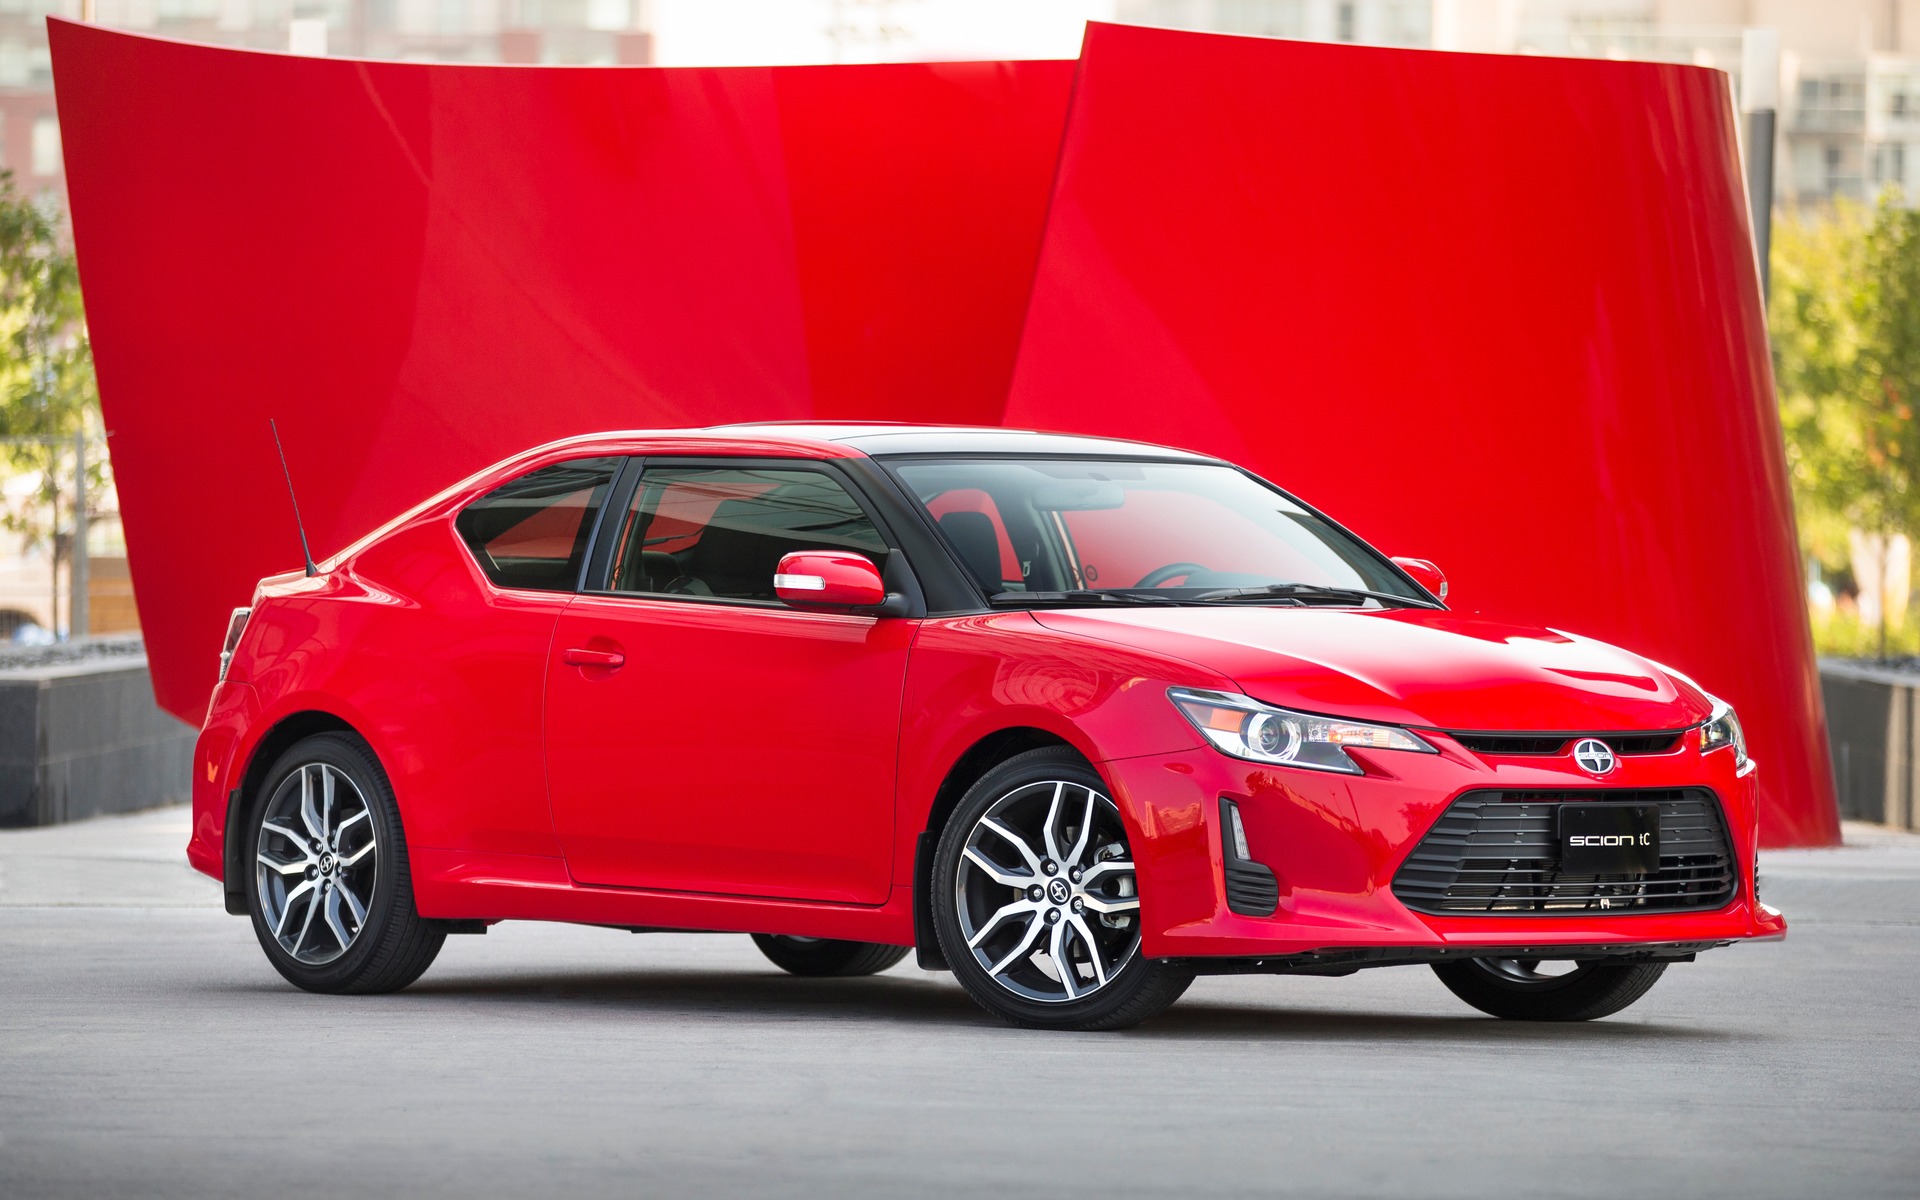 To keep buyers interested, Scion revised its tC slightly this year.